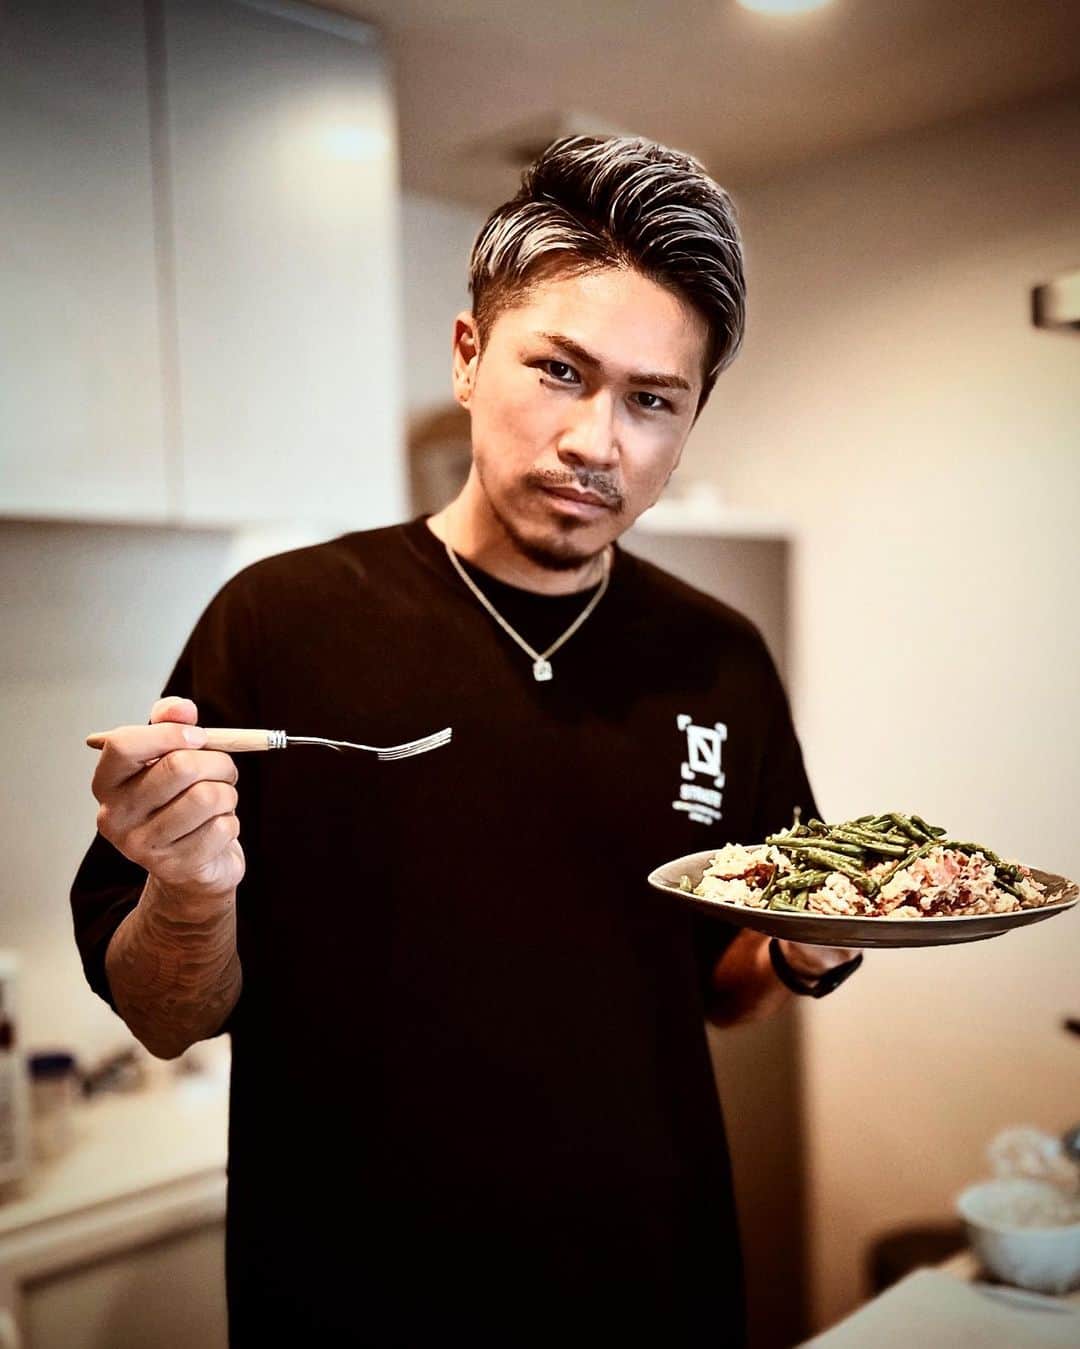 DJ ACEのインスタグラム：「📺🍳 人生初料理の🦍と、人生2度目の料理となる私の奇跡の料理動画をごらんあれ ⁡ We cooked for the first time😂 ⁡ @hellofreshjapan  #HelloFresh #こんな俺らでも激うま #料理人超え #初料理 #料理男子 #ACE1TV #ACE1」